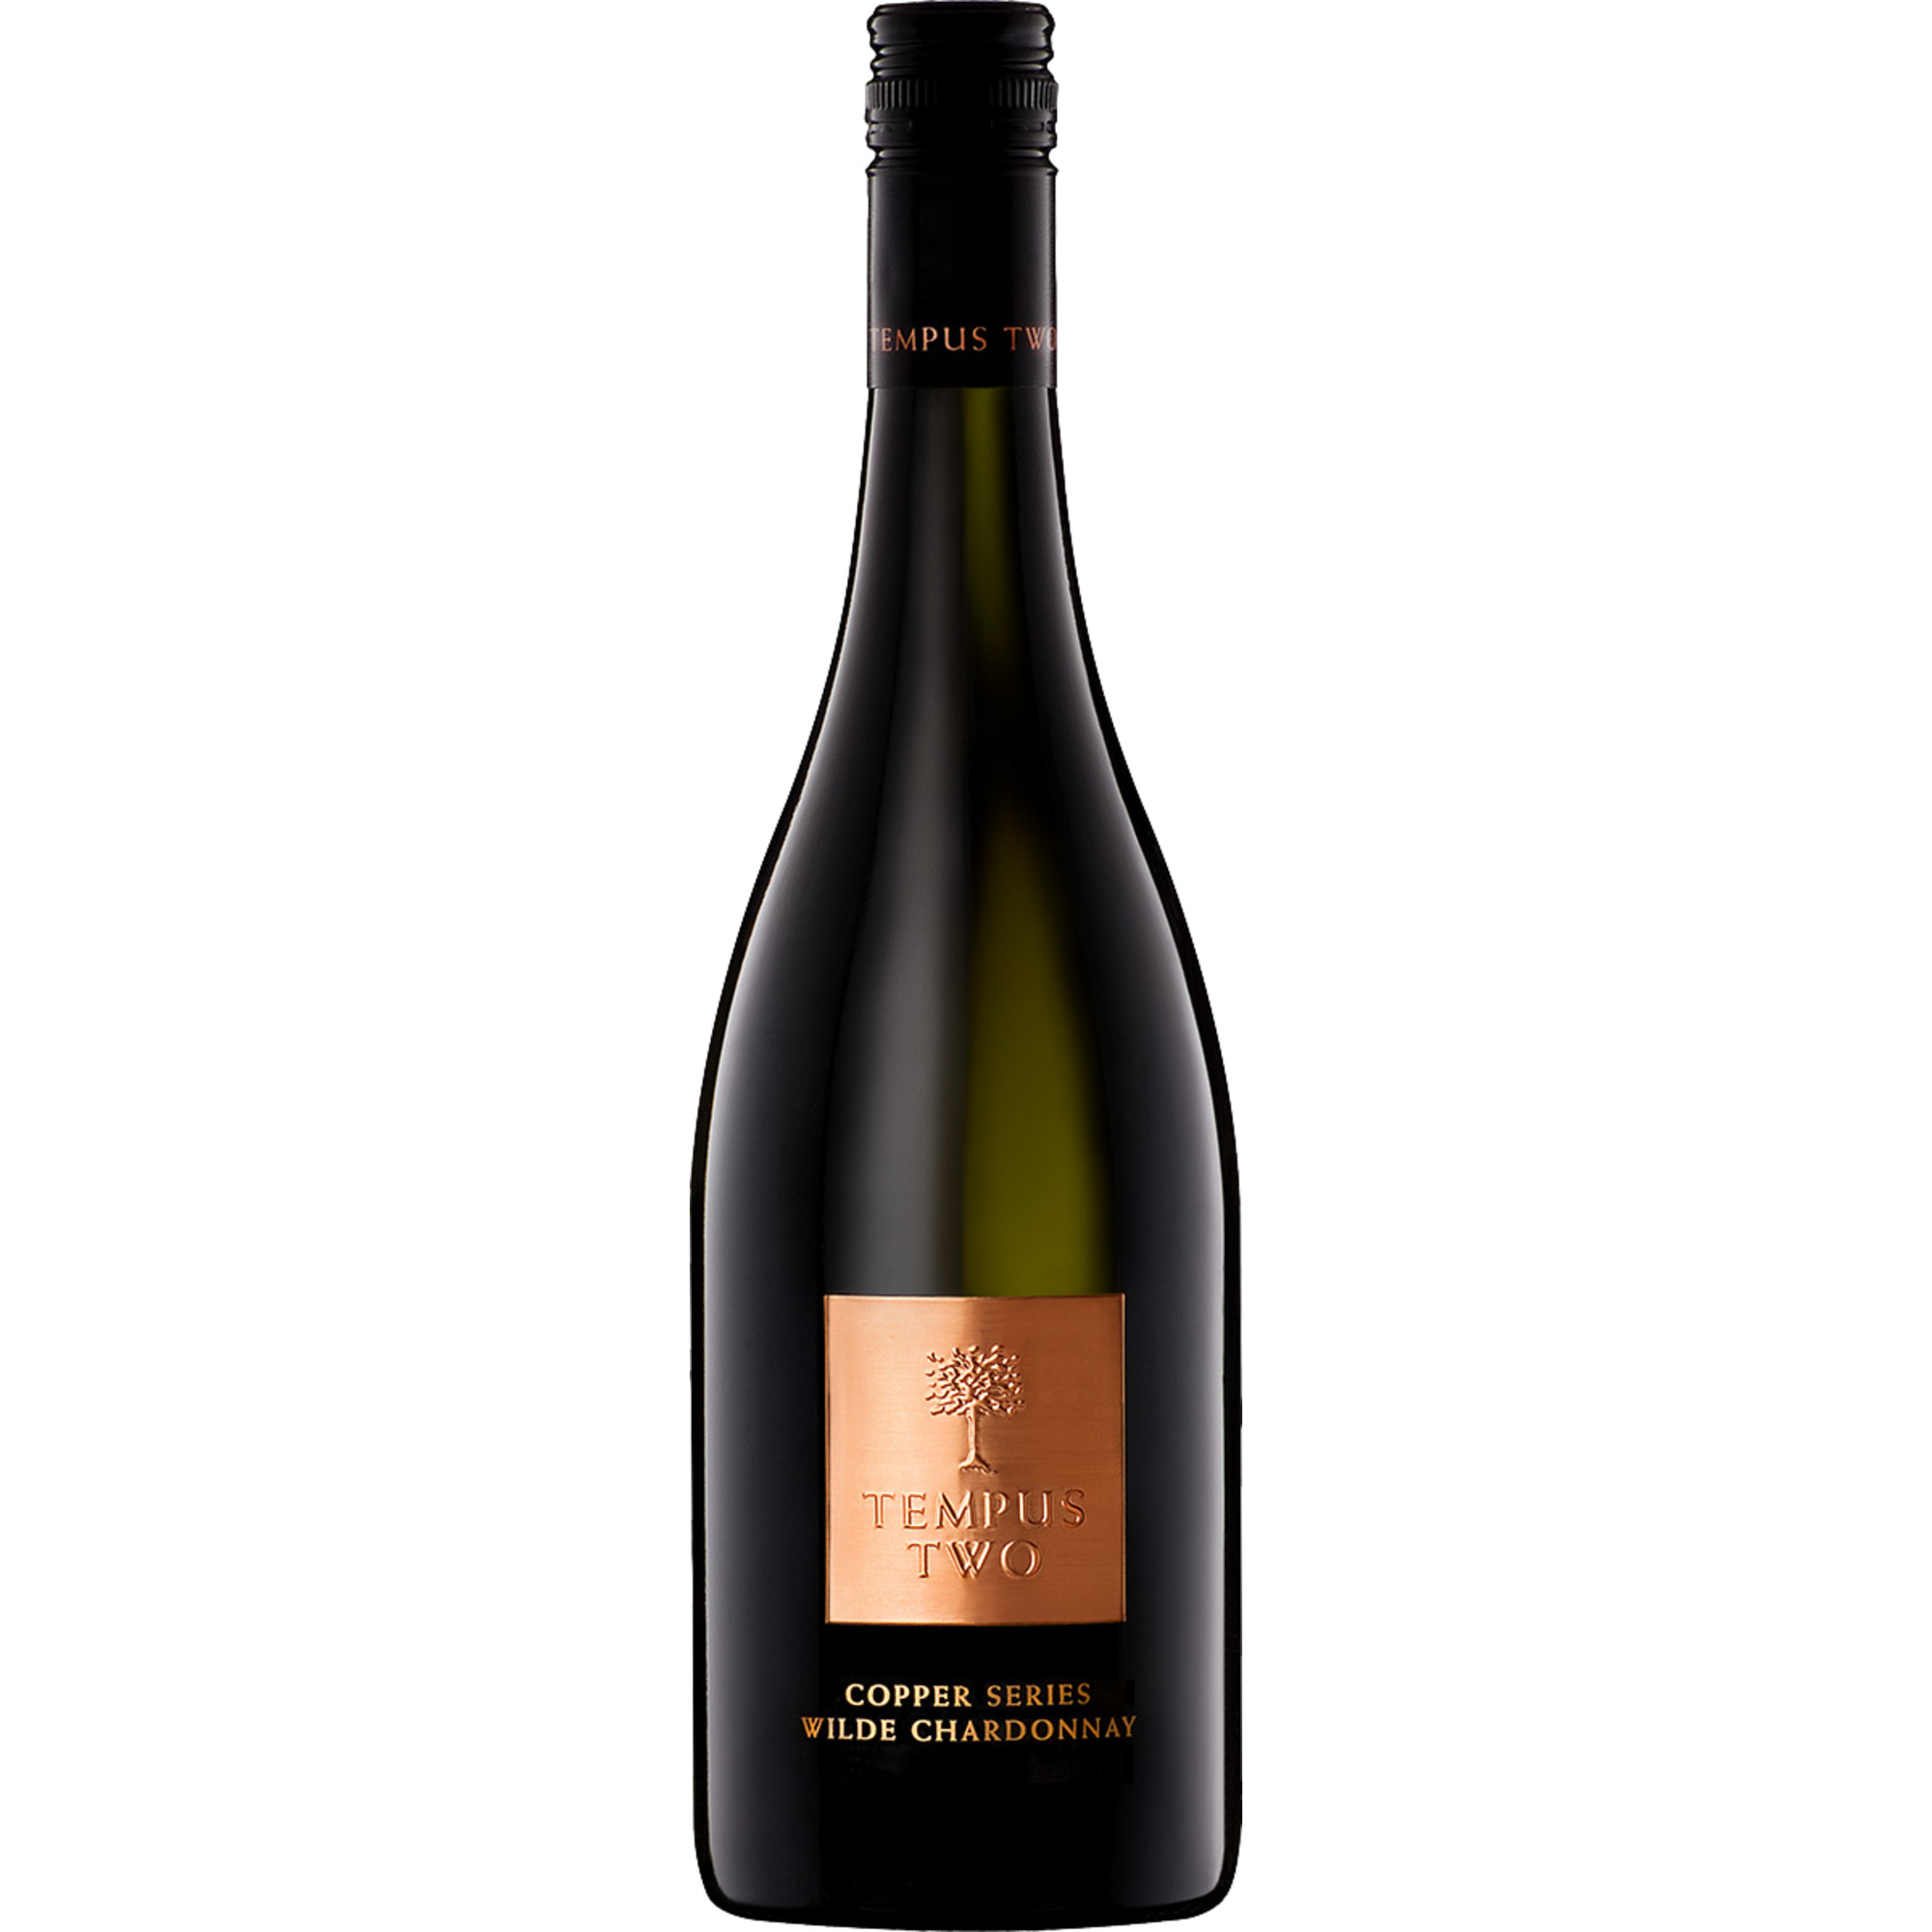 Copper Series Wilde Chardonnay, New South Wales, New South Wales, 2021, Weißwein